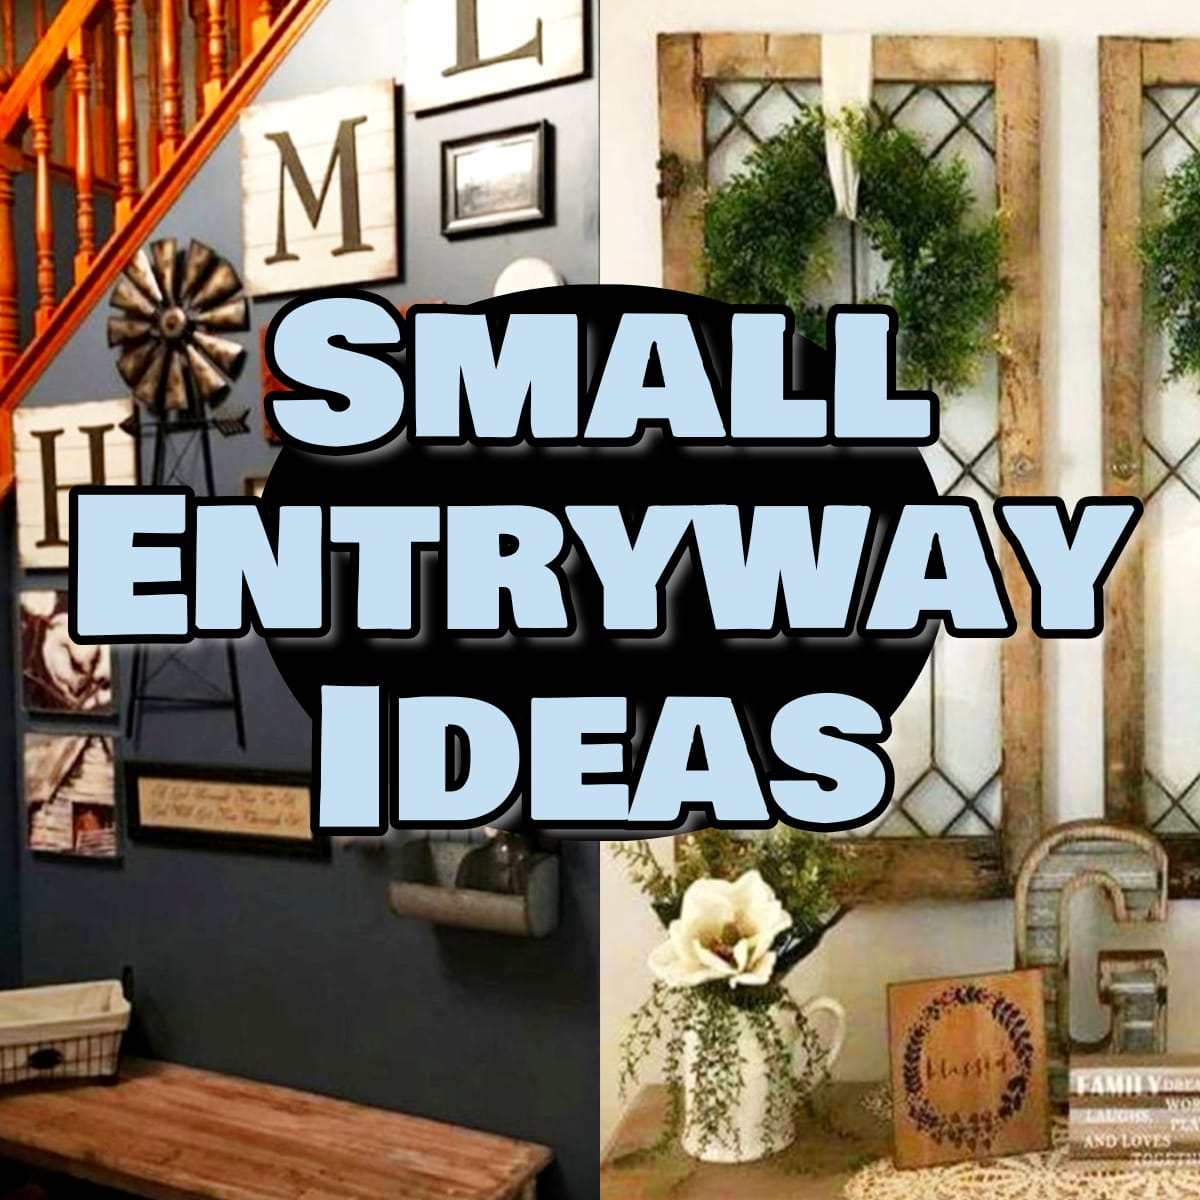 Small Entryway ideas - pictures of foyer decorating ideas for small entrance hallways and apartment foyers